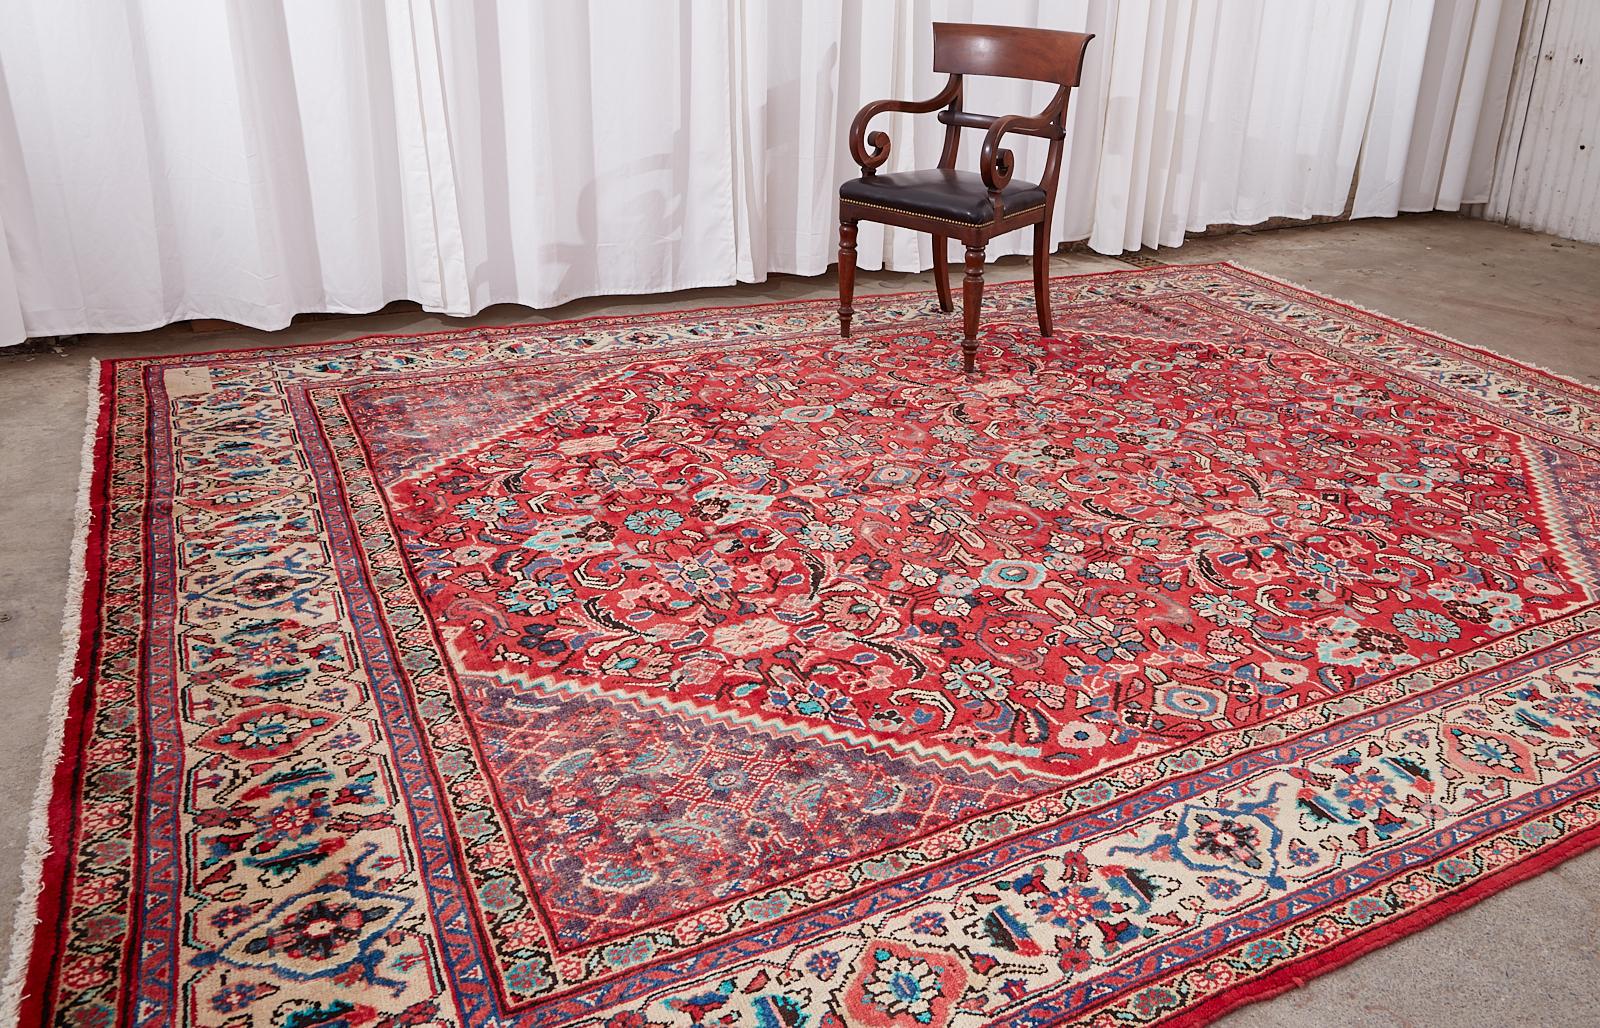 Fantastic traditional antique mahal rug featuring a field with triangular corners. The vivid colors stand out especially in the border over a beige ground. The entire rug is accented with bright teal colors that contrast the different shades of red.